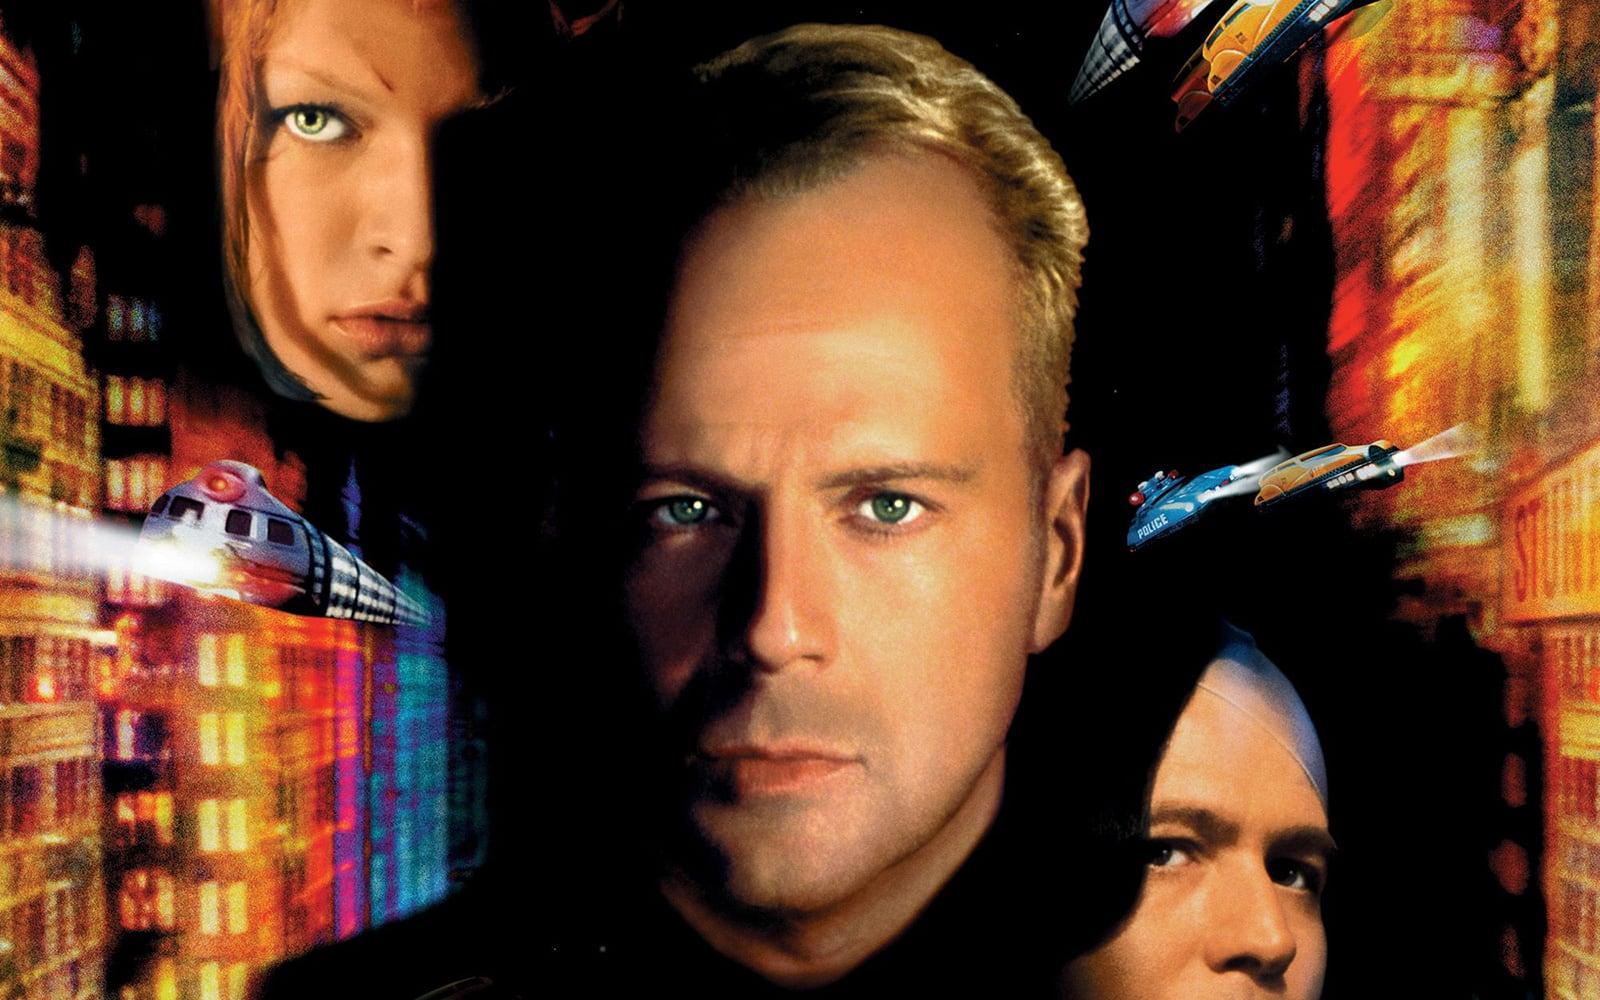 The Fifth Element - Luc Besson